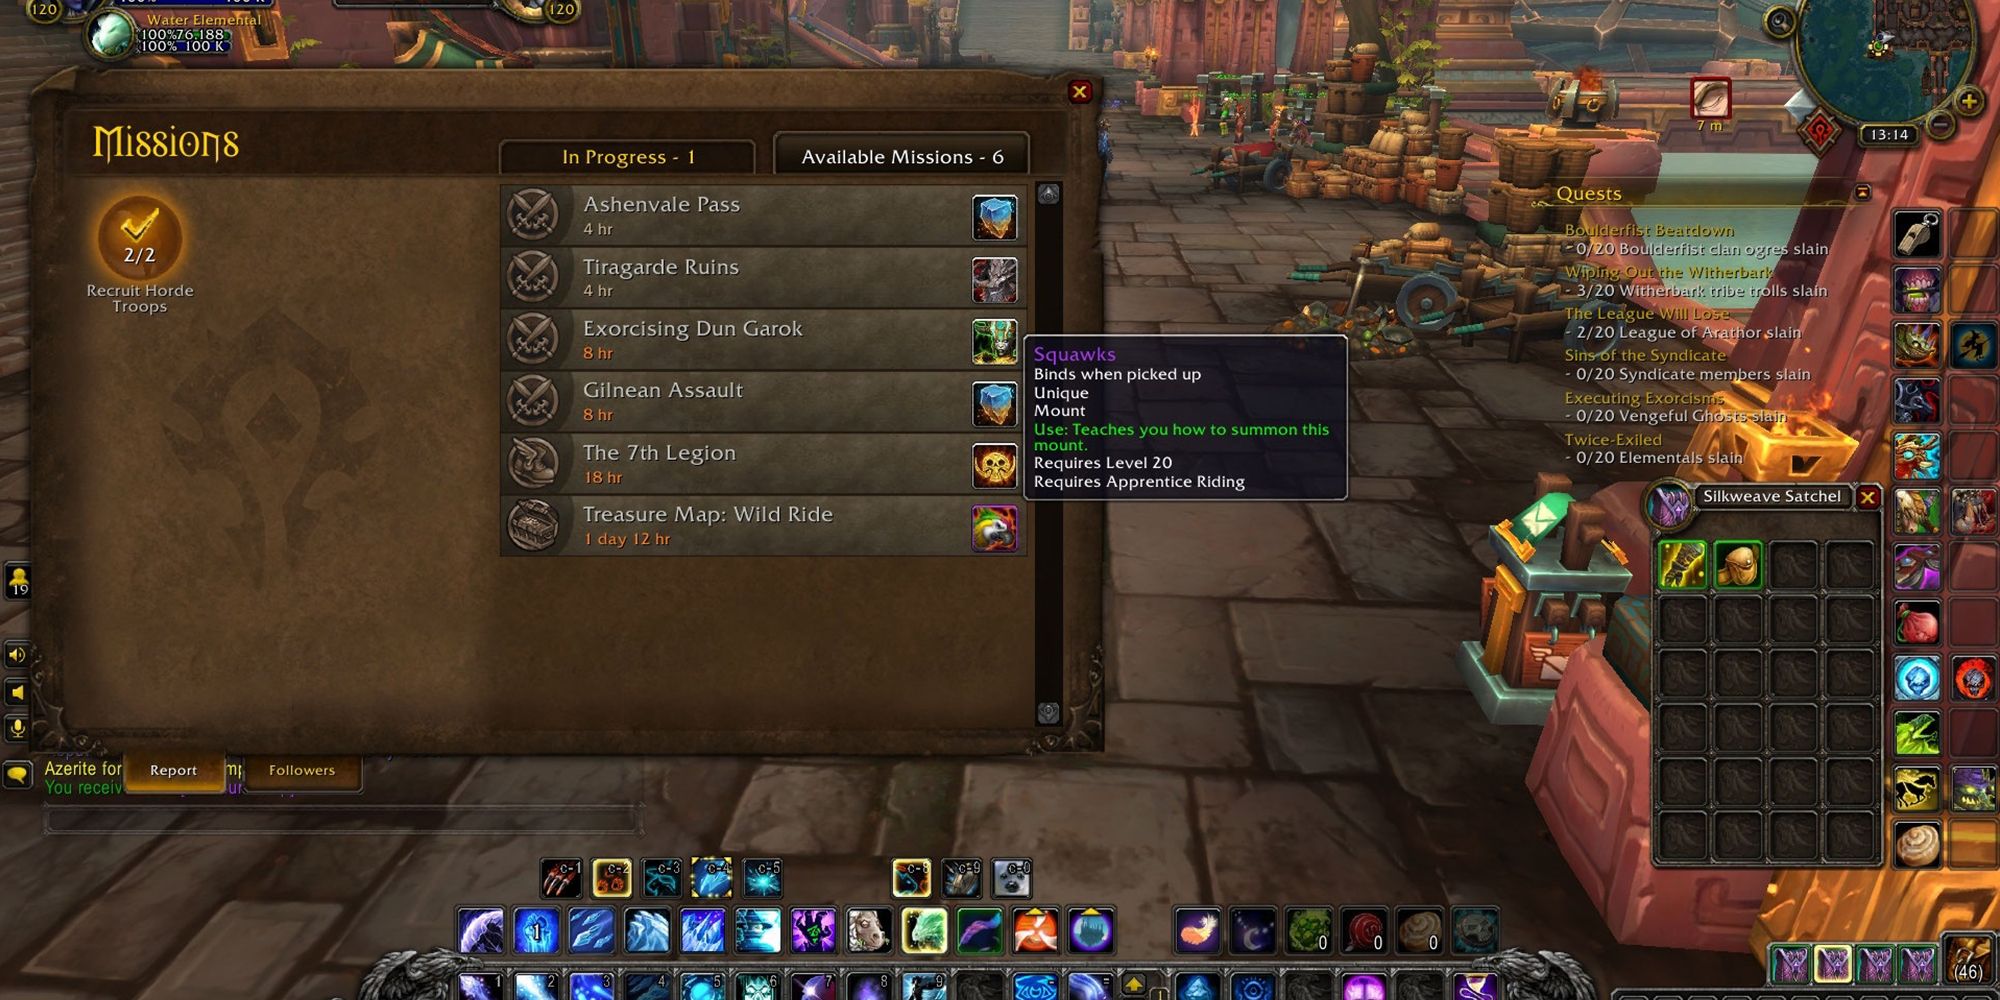 Mission Table Screen in Battle for Azeroth Expansion